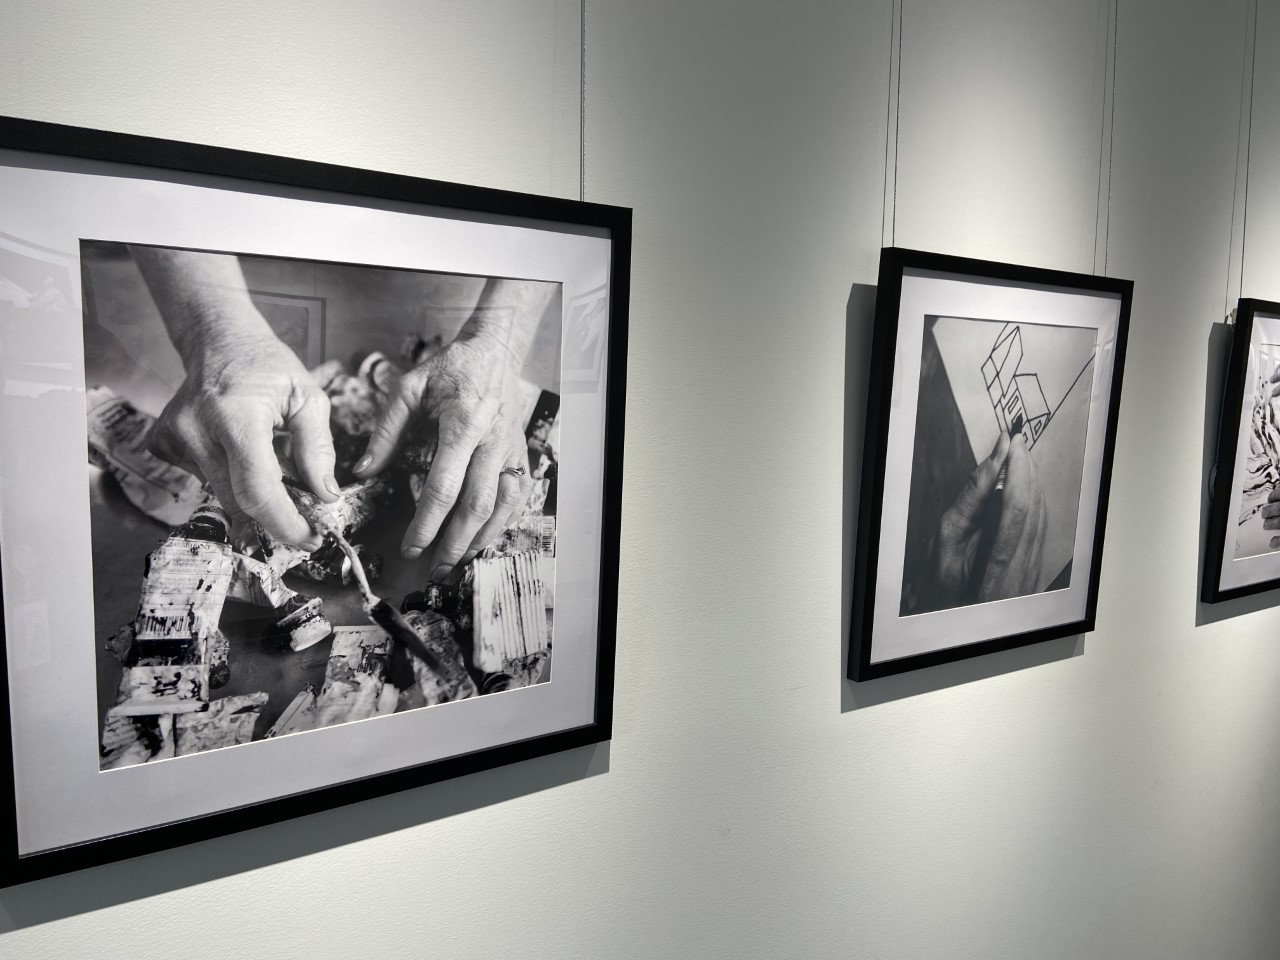 photographs of hands from library art exhibit